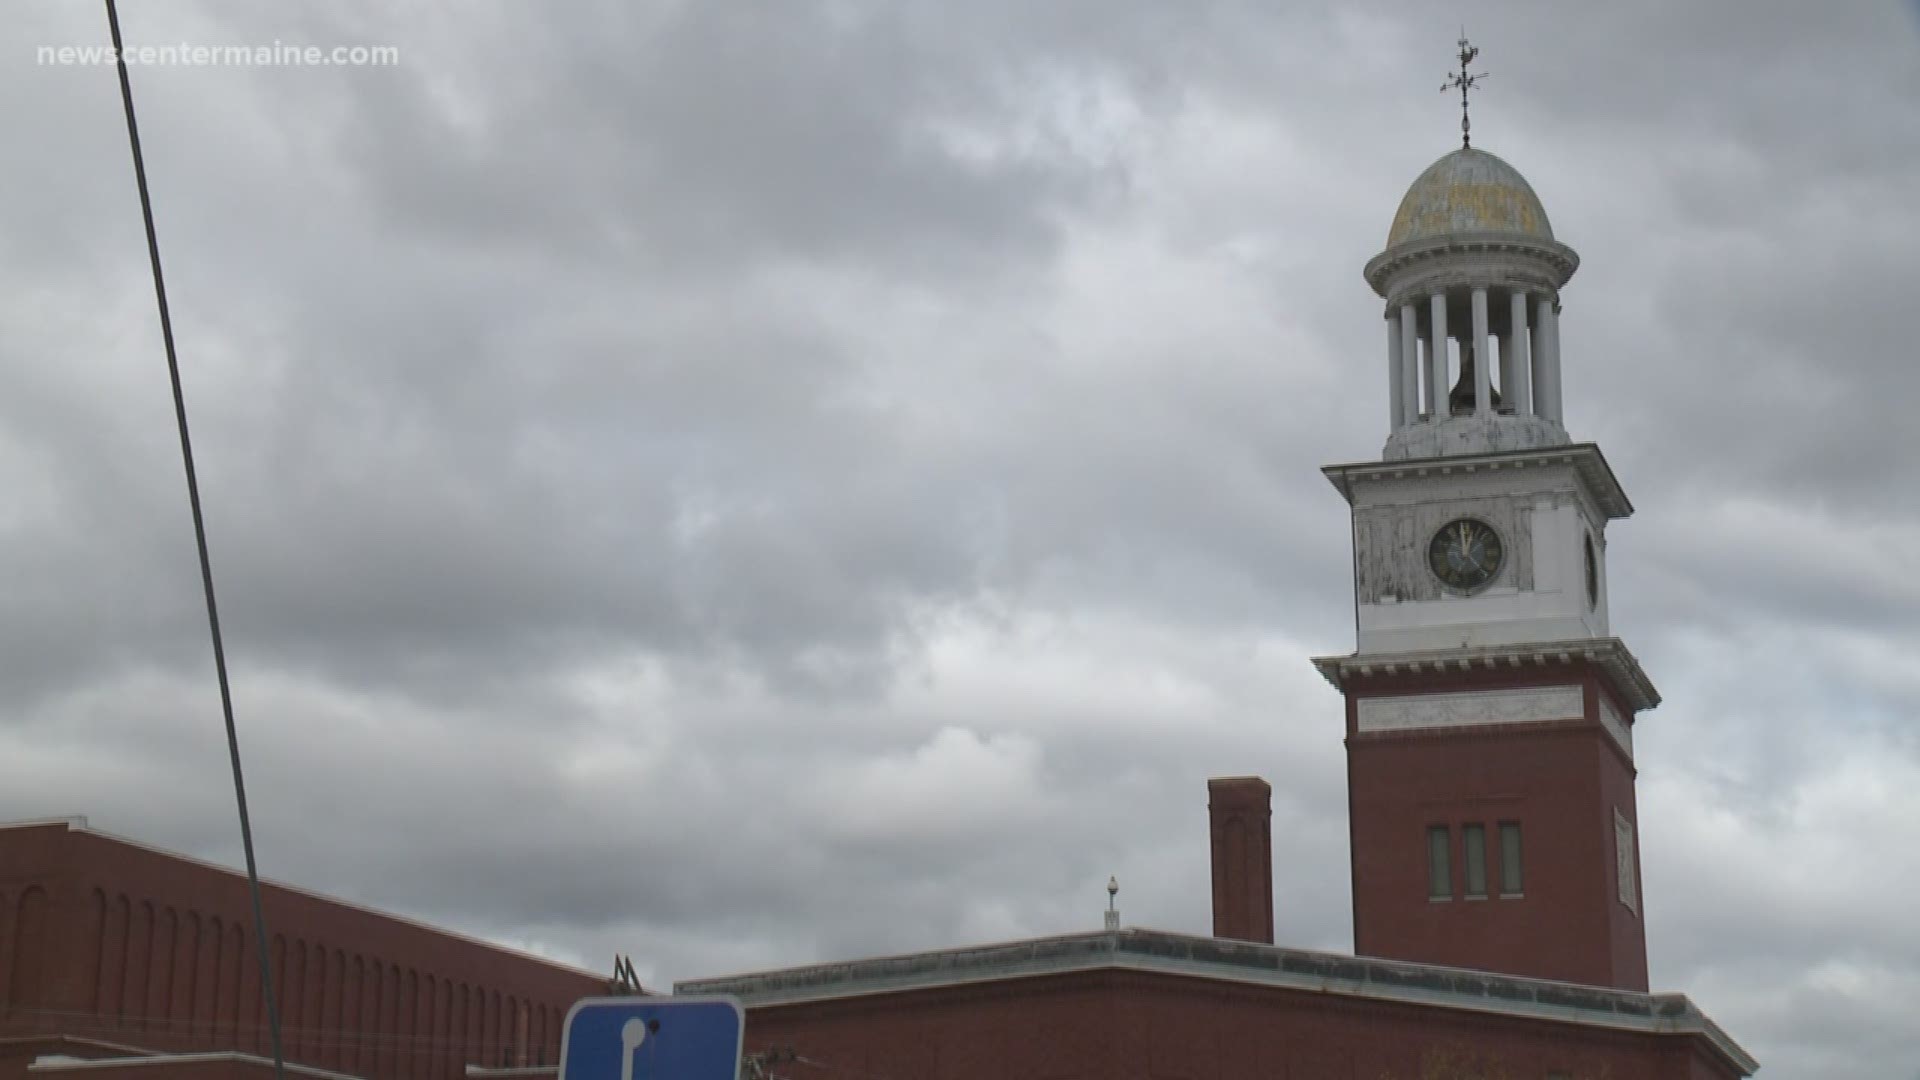 Biddeford's historic Clock Tower, located on City Hall, has won a 150 thousand dollar preservation grant.